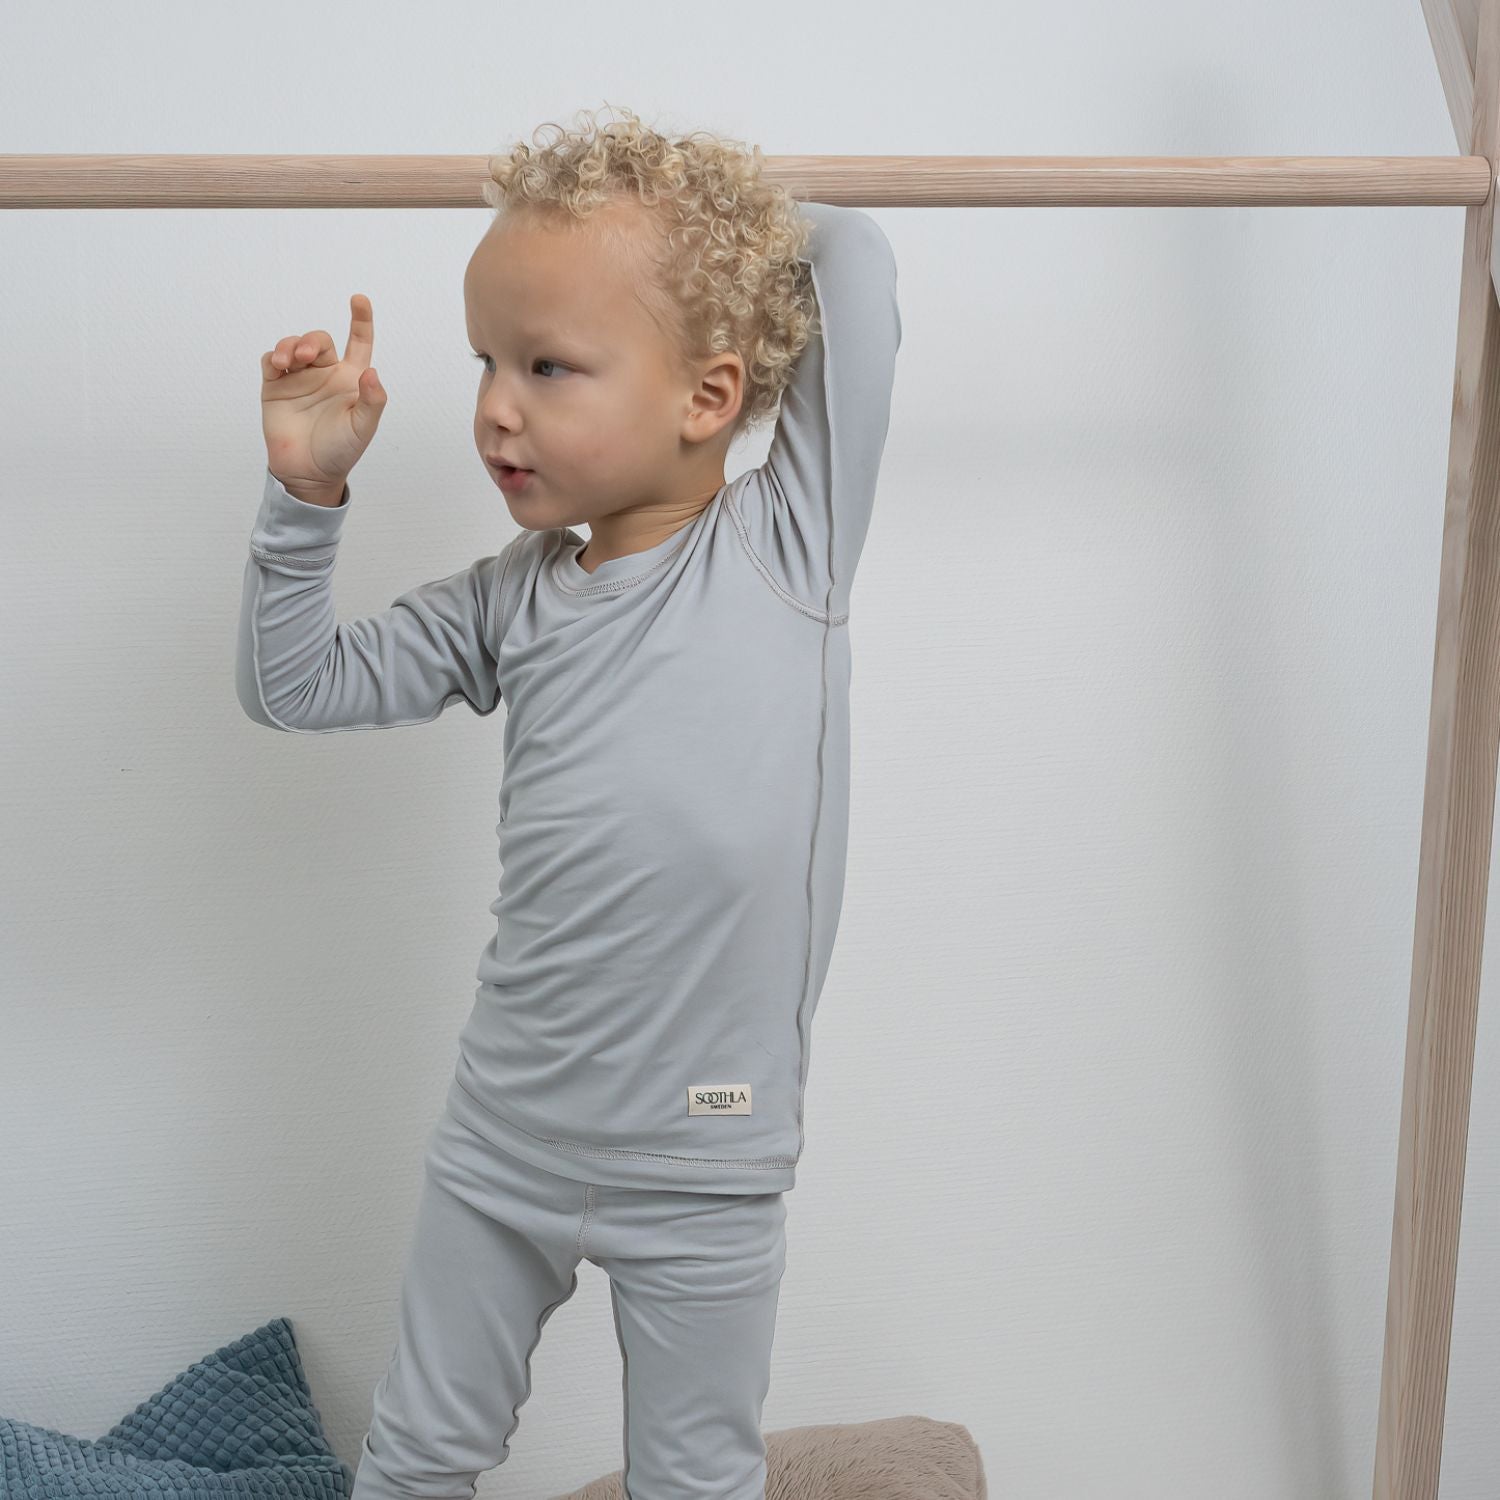 Boy In SOOTHLA Allergy-friendly Long-sleeved Children's Top And Legging.